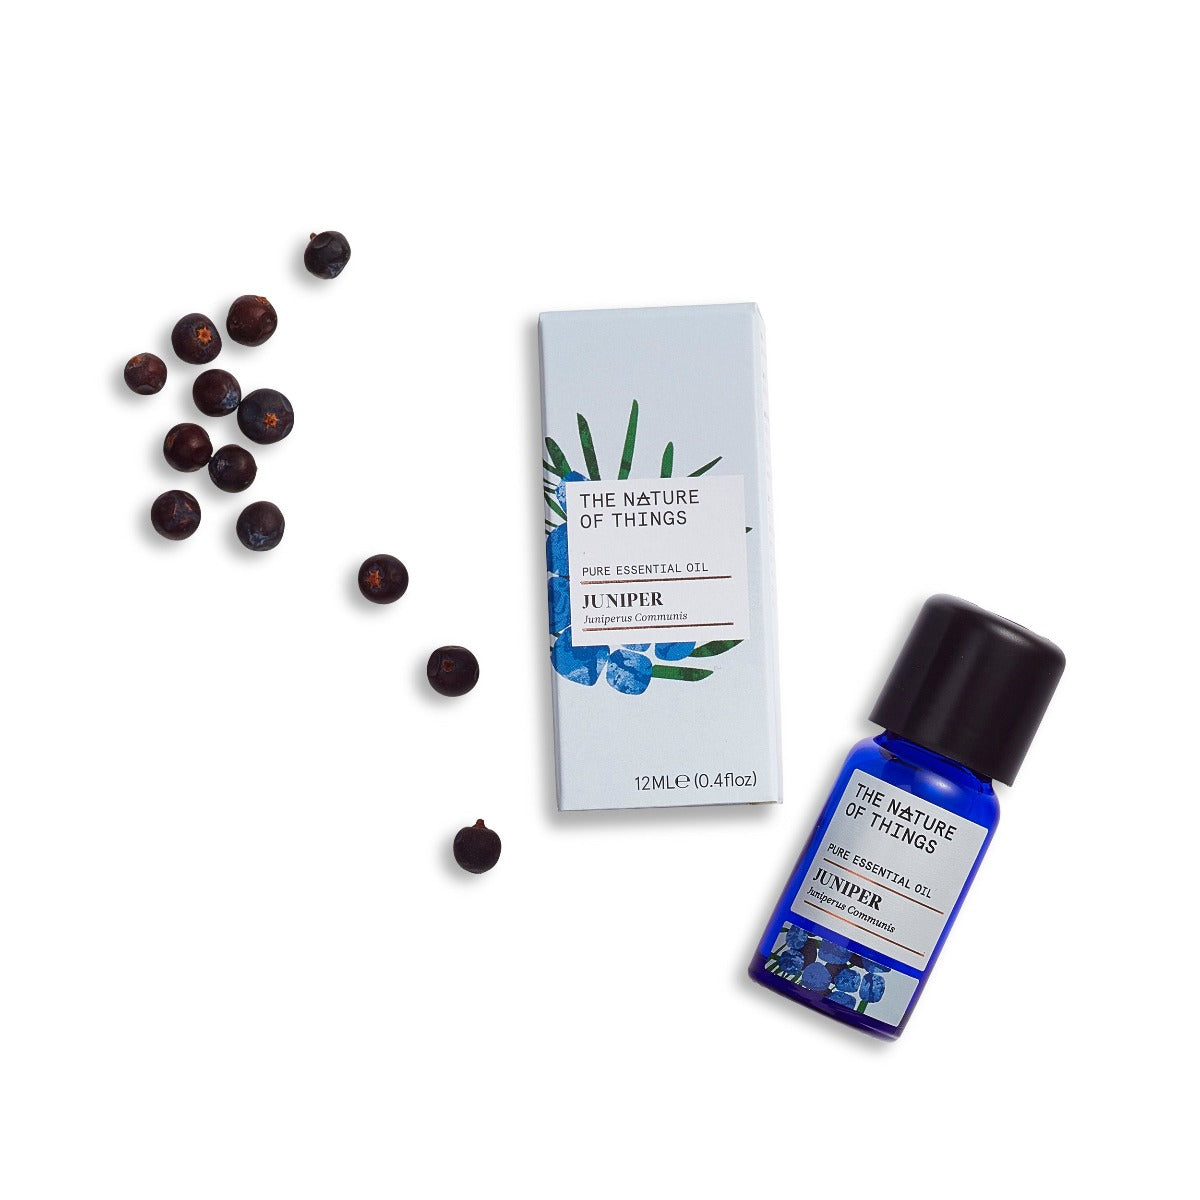 Juniper Berry Essential Oil from The Nature of Things